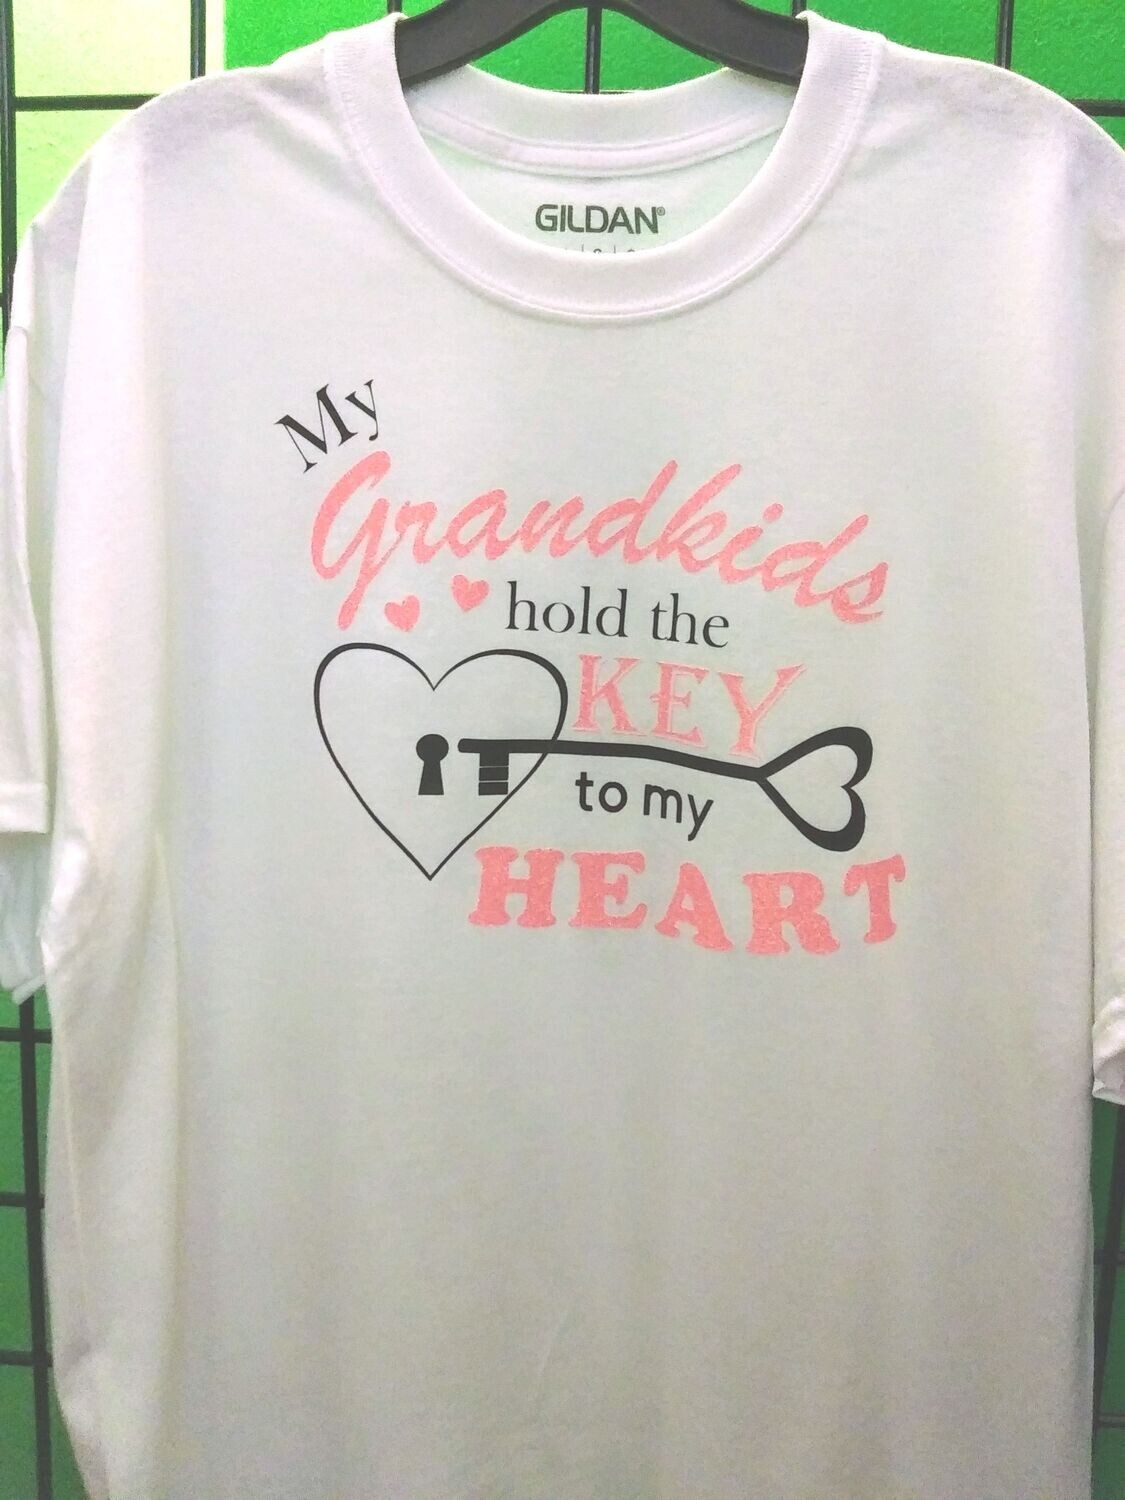 My Grandkids Hold the Key to My Heart, Adult Large White T-shirt